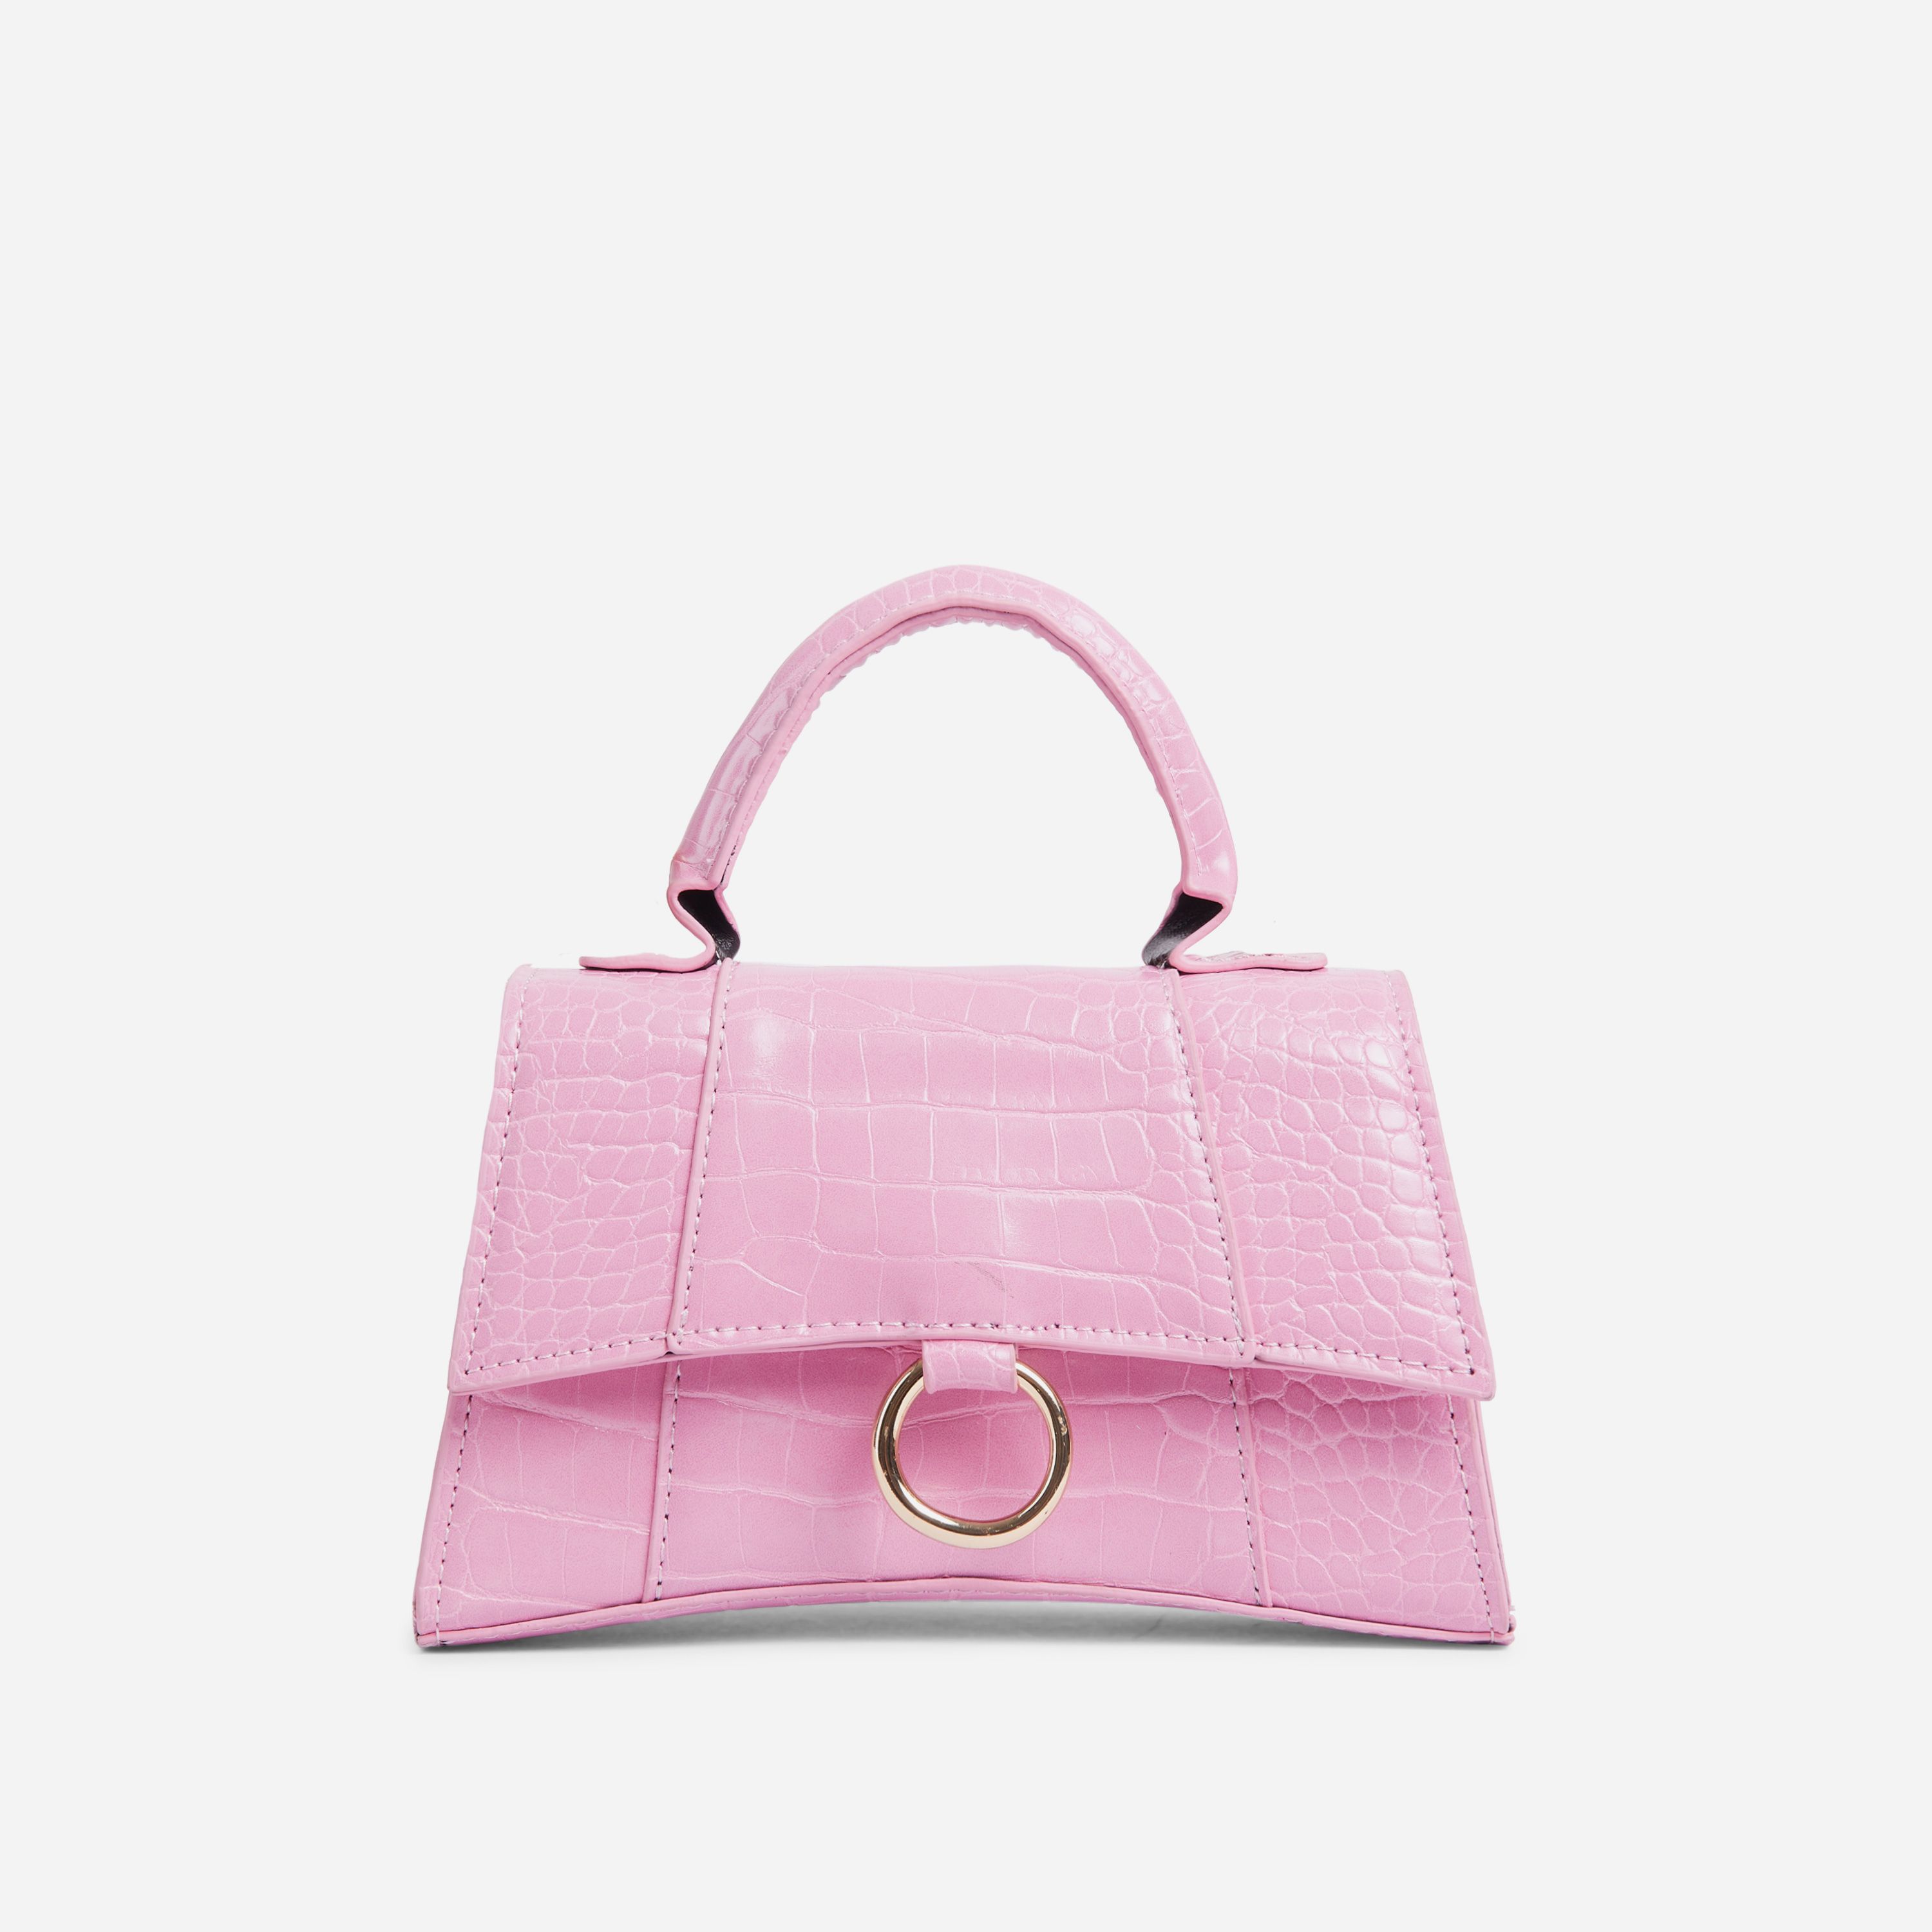 Balenciaga hourglass bag dupes from £15 - SURGEOFSTYLE by Benita